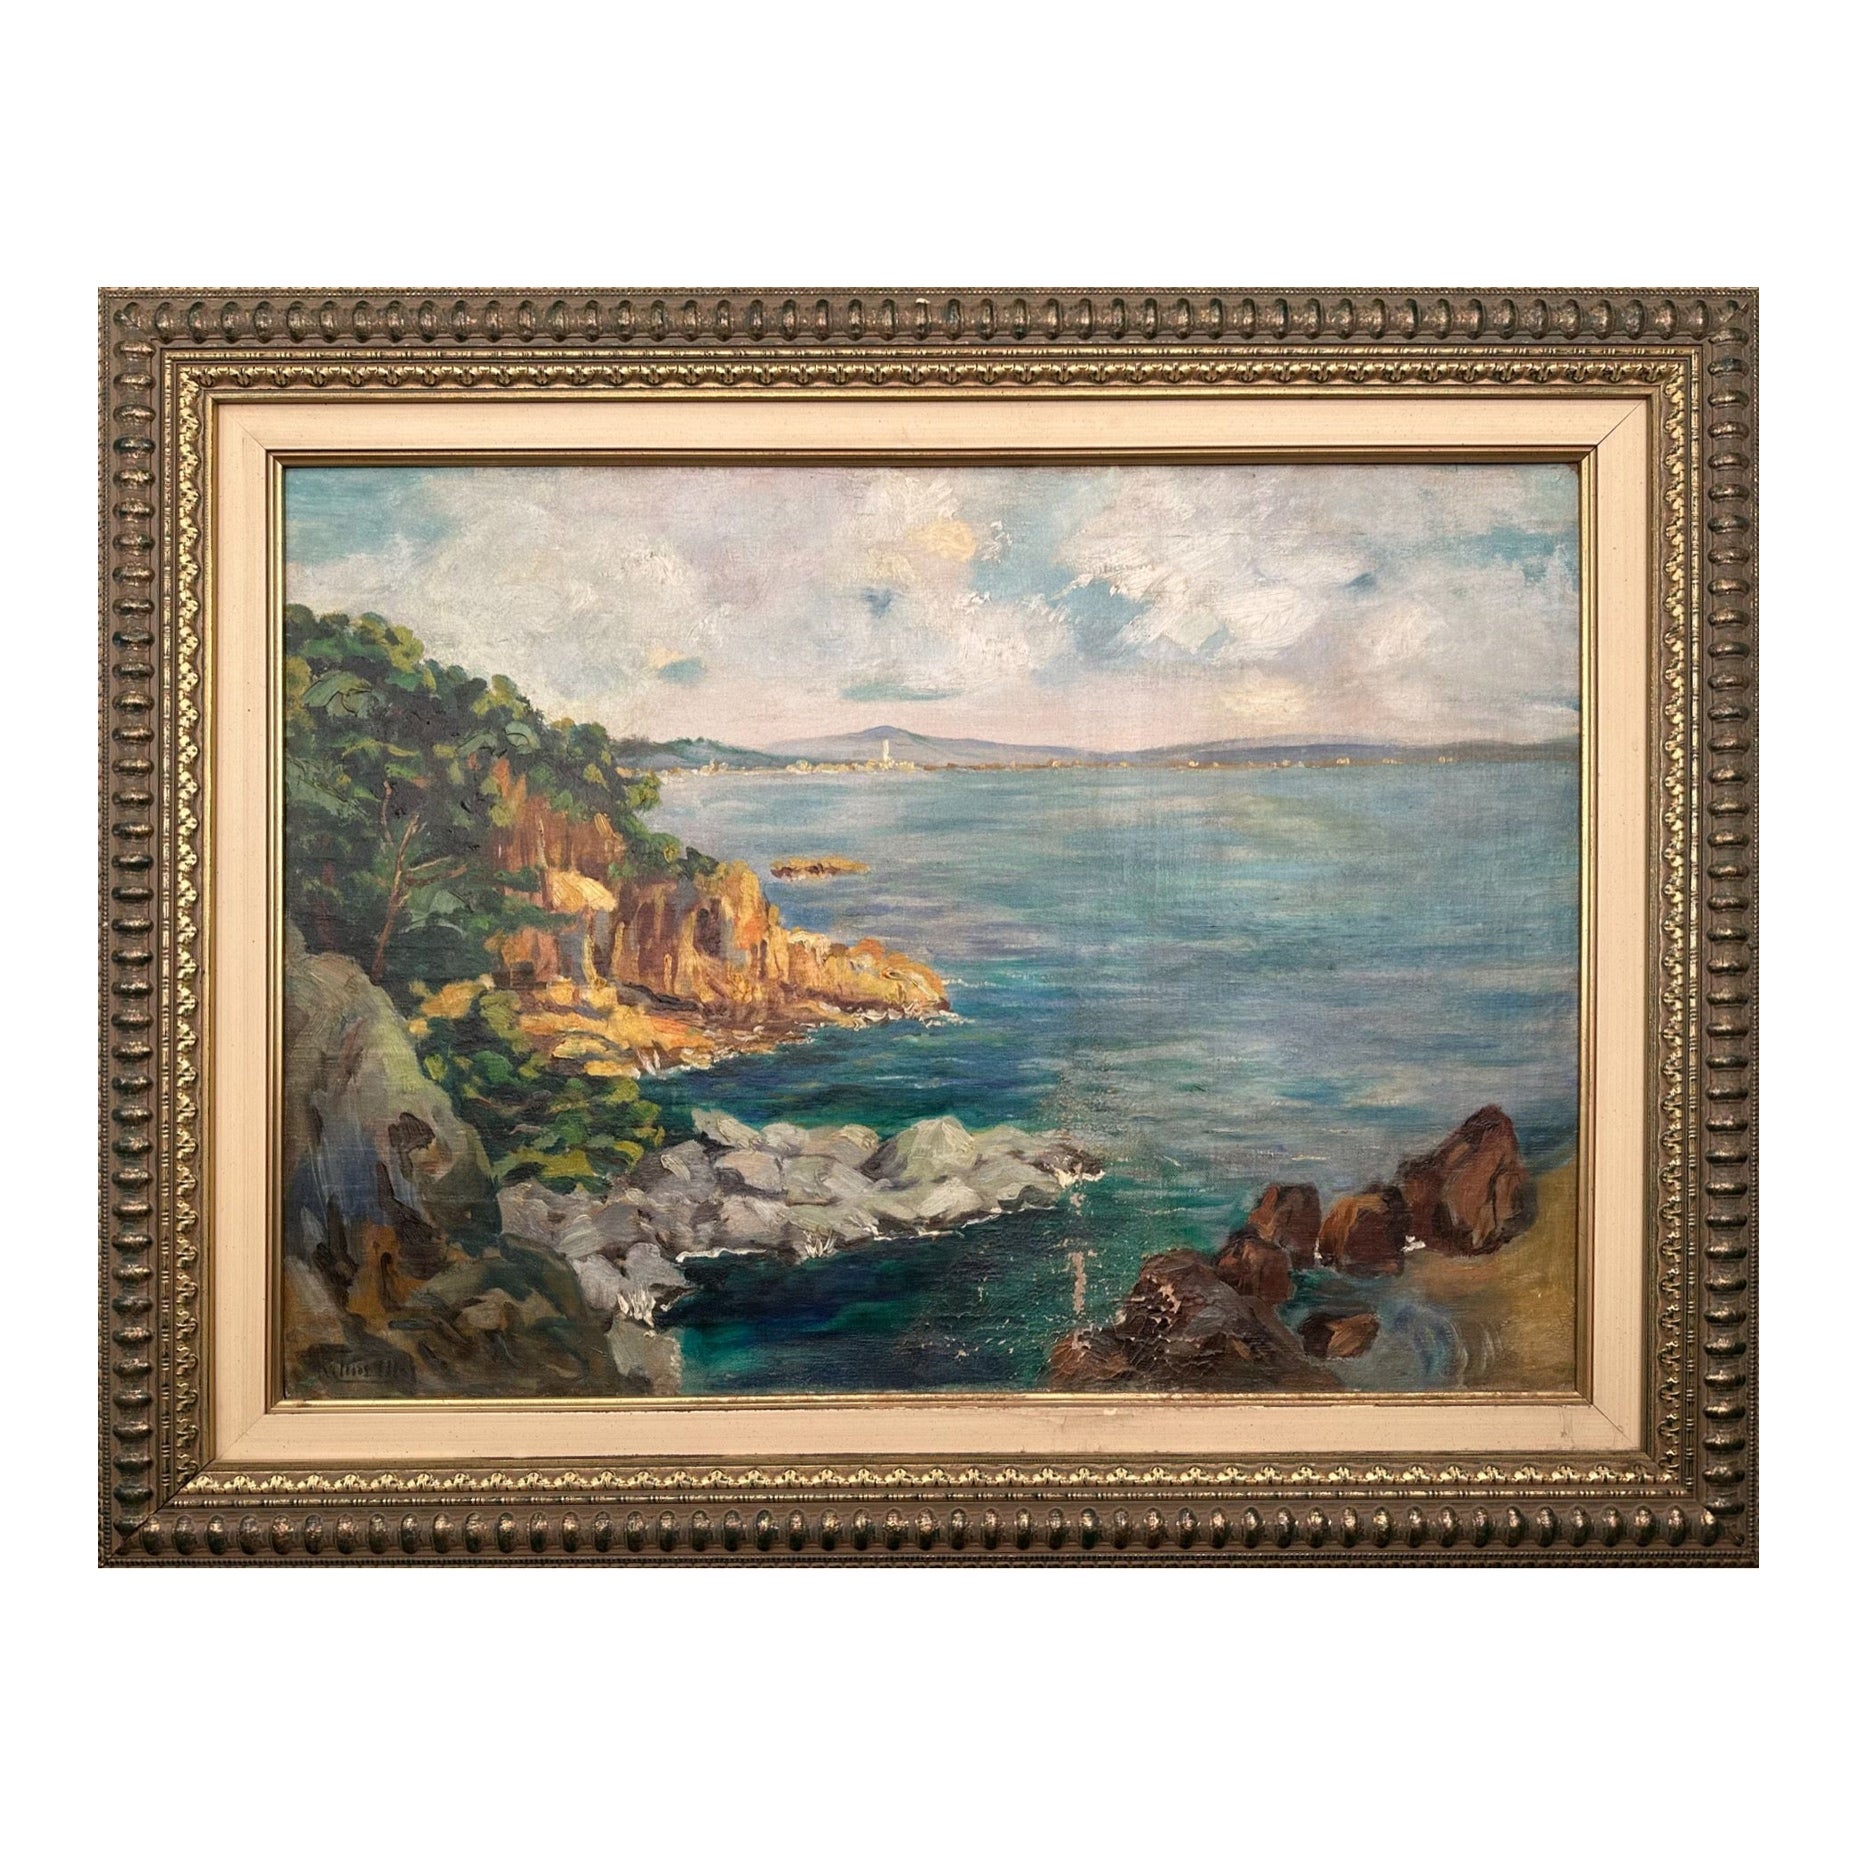 Italian or Spanish City Oil Painting of a Beautiful Landscape